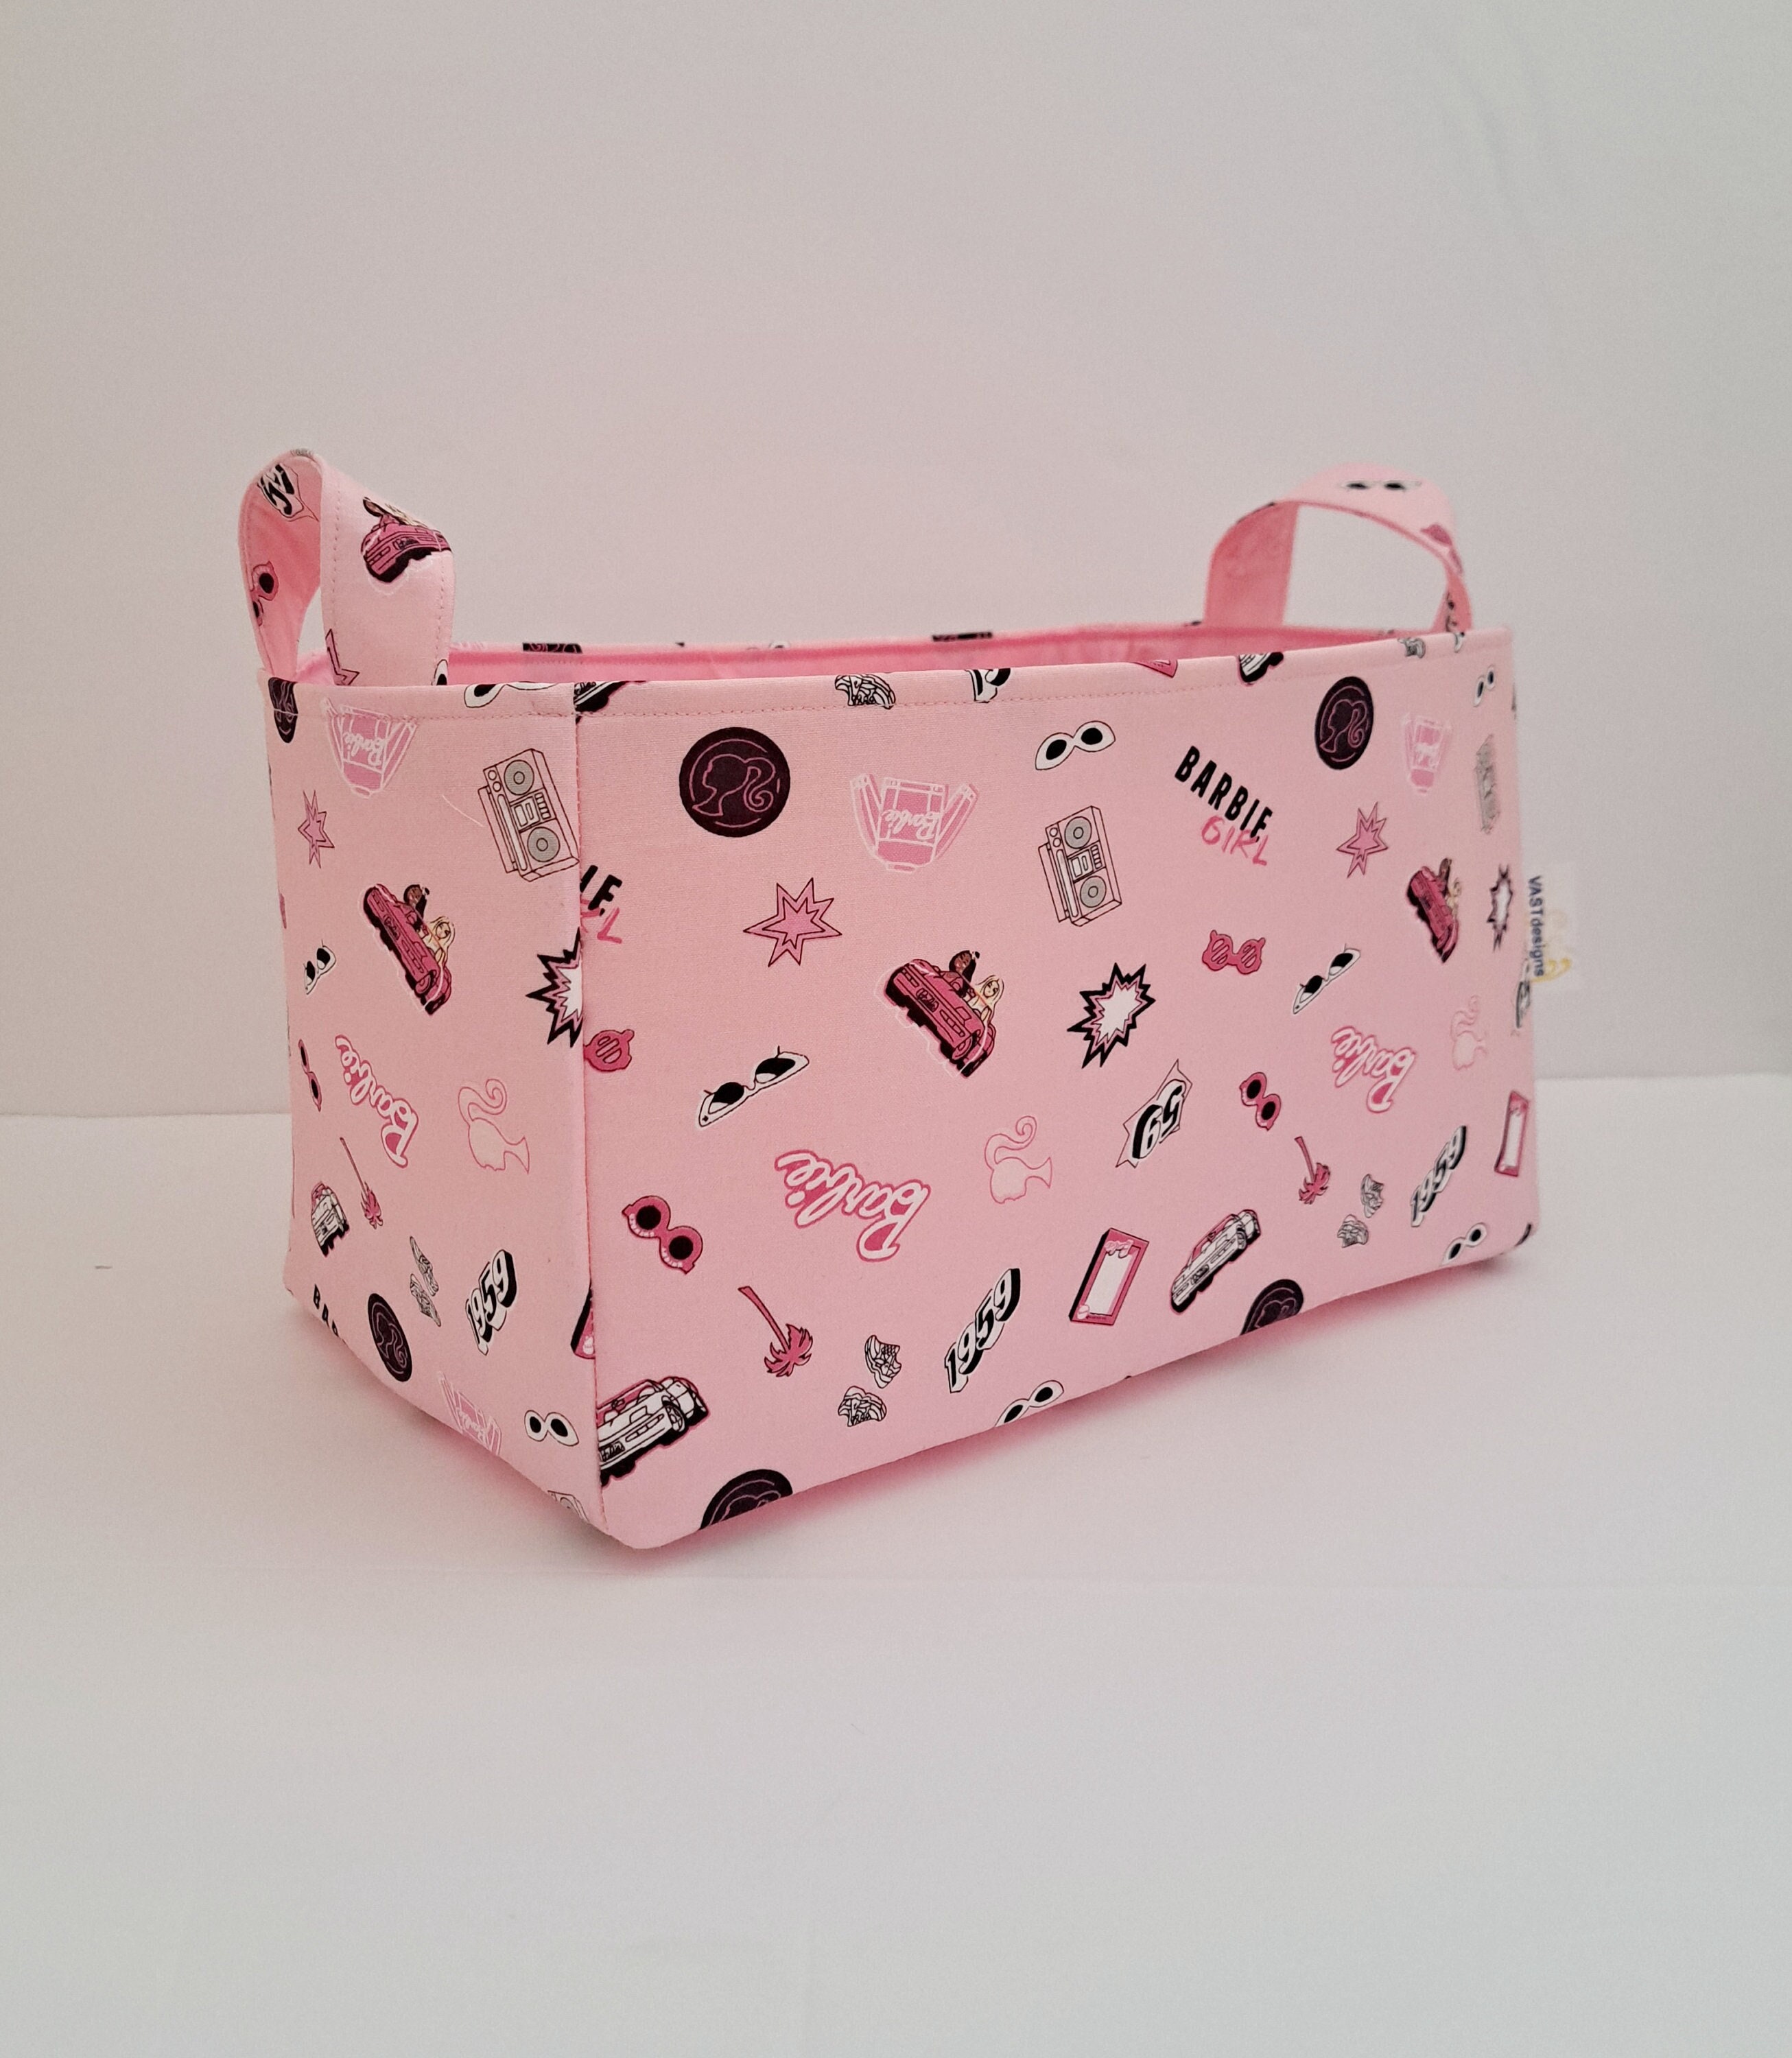 Portable Storage Bag Carrying Case Protective Case for Cricut Joy  9.9x5.9x6.3in